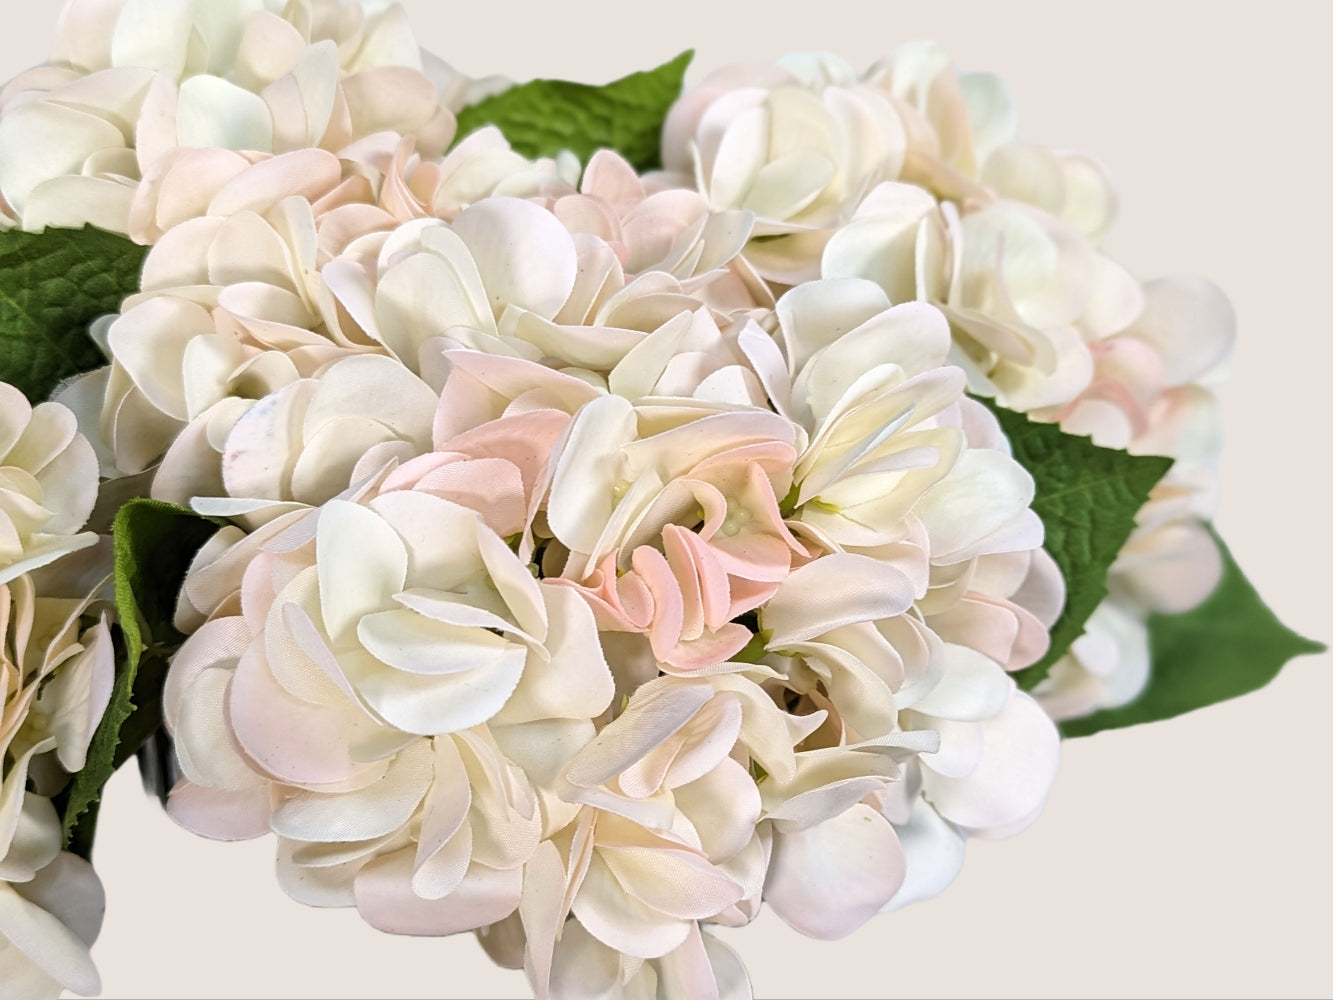 An image of an artificial hydrangea made with real touch materials that make it softer to the touch than traditional artificial flowers. The petals are creamy white with a faint soft pink on the tips of the petals, giving it a natural and delicate appearance. The stem has a color gradient including brown and green, adding to the realism of the flower. The image provides a close-up view of the flower, allowing the viewer to appreciate the intricate details of the petals and stem.